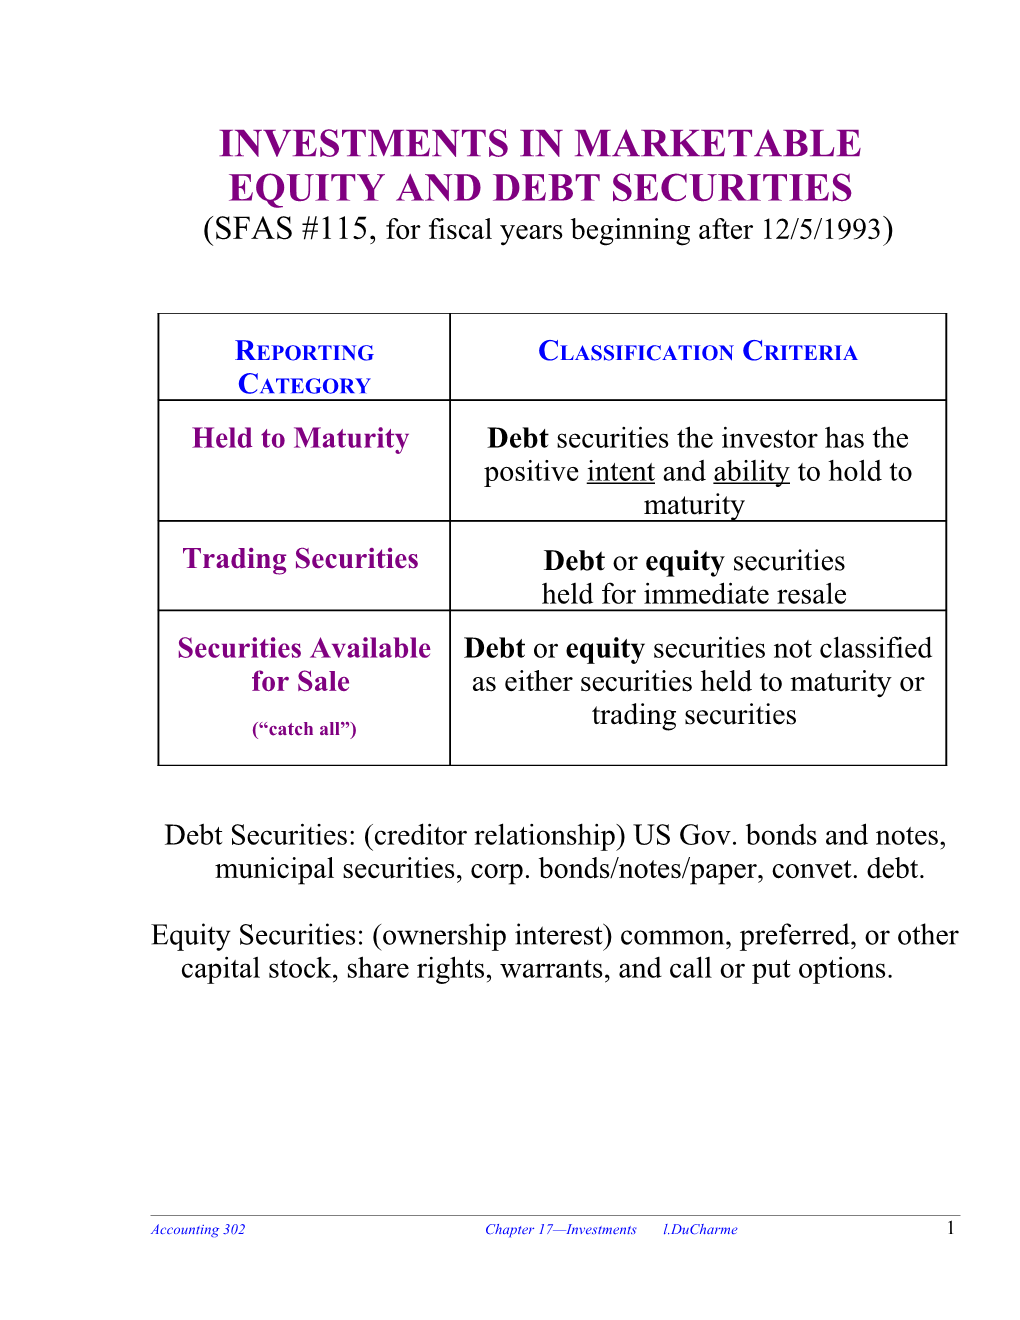 Investments in Marketable Equity and Debt Securities